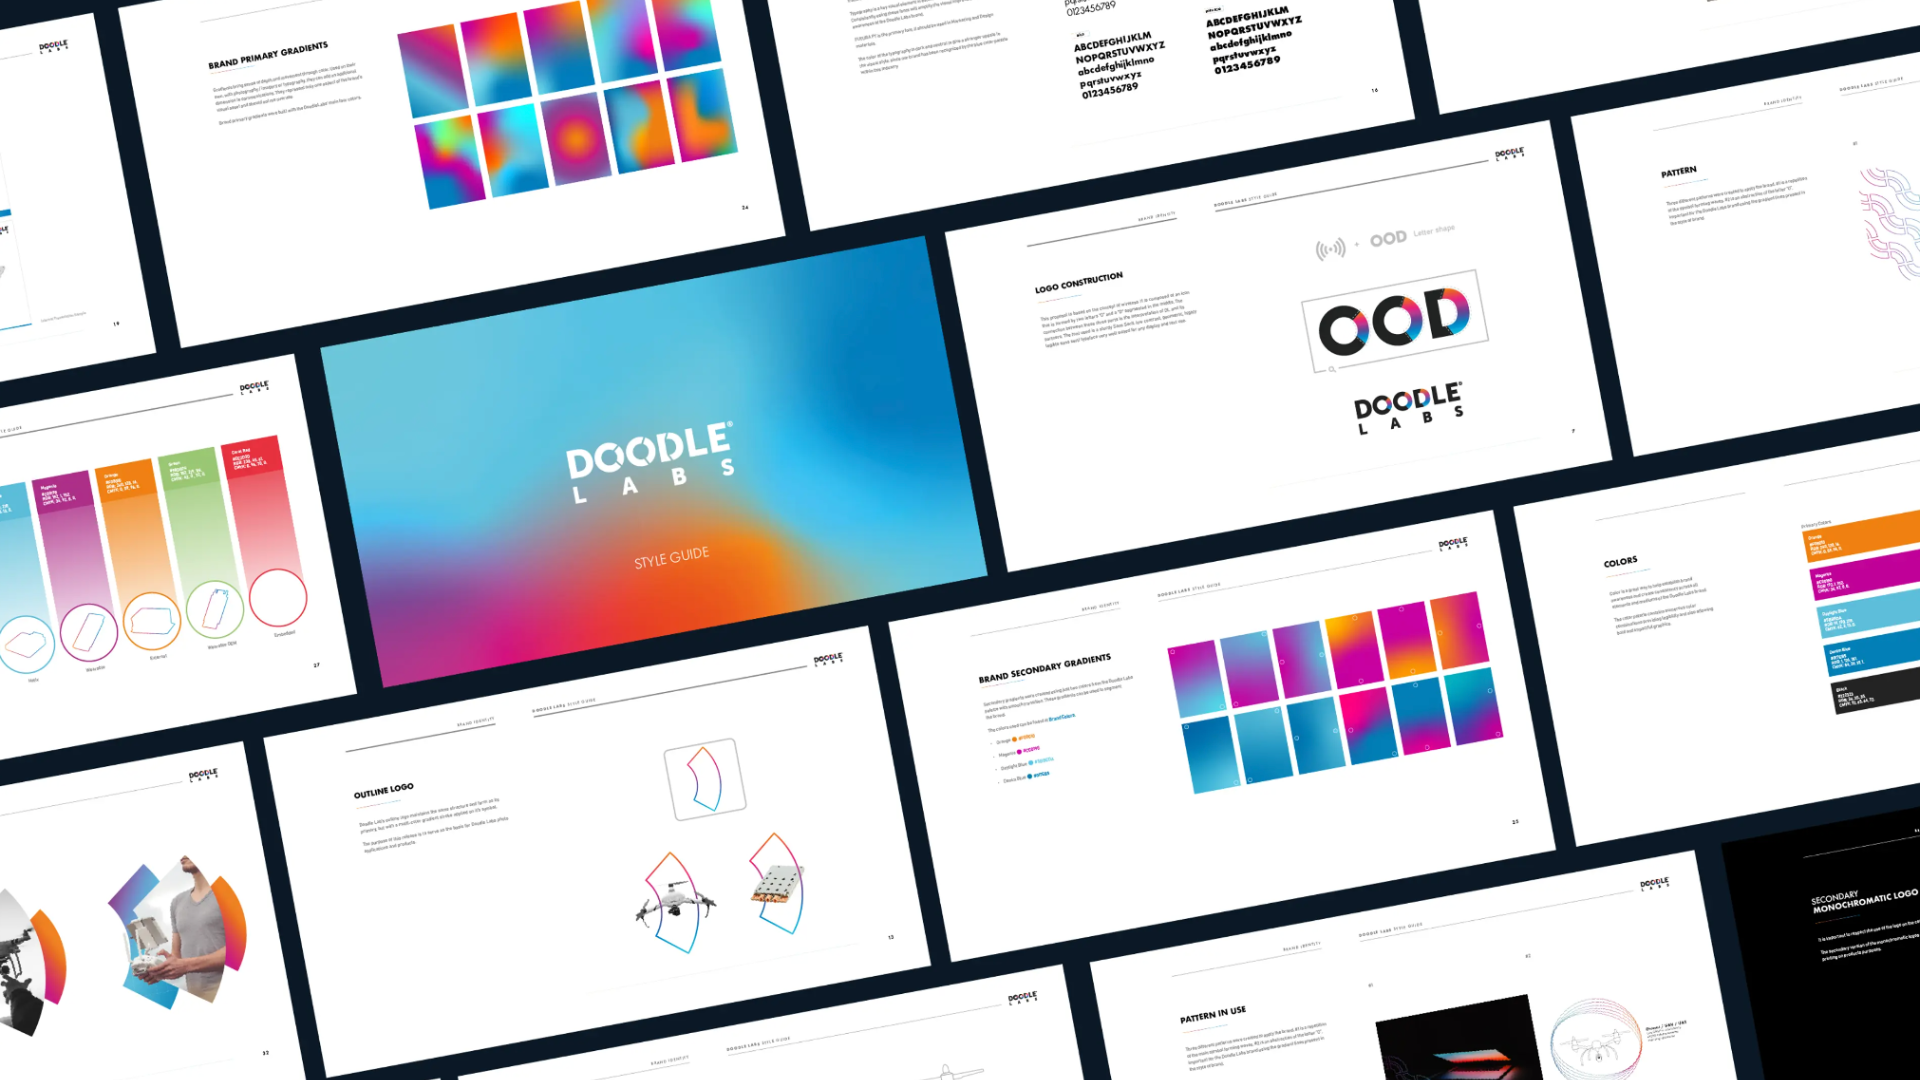 A page from the Doodle Labs brand guidelines developed in collaboration with Superside.